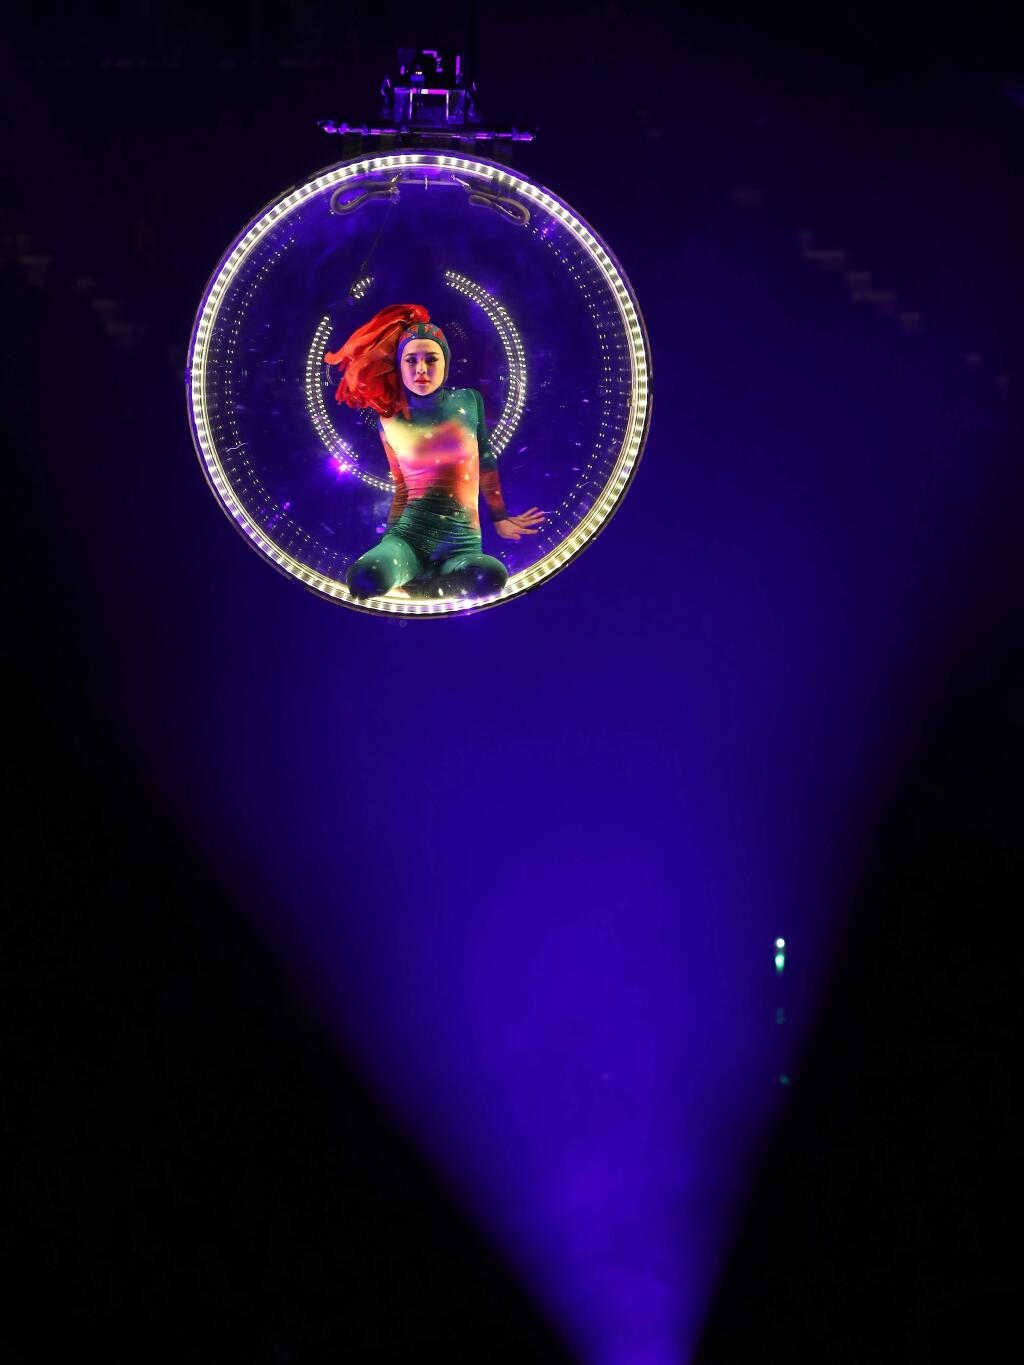 An acrobat performs in a transparent ball suspended above the floor during the final show of the Ringling Bros. and Barnum & Bailey Circus, Sunday, May 21, 2017, in Uniondale, N.Y. (AP Photo/Julie Jacobson)